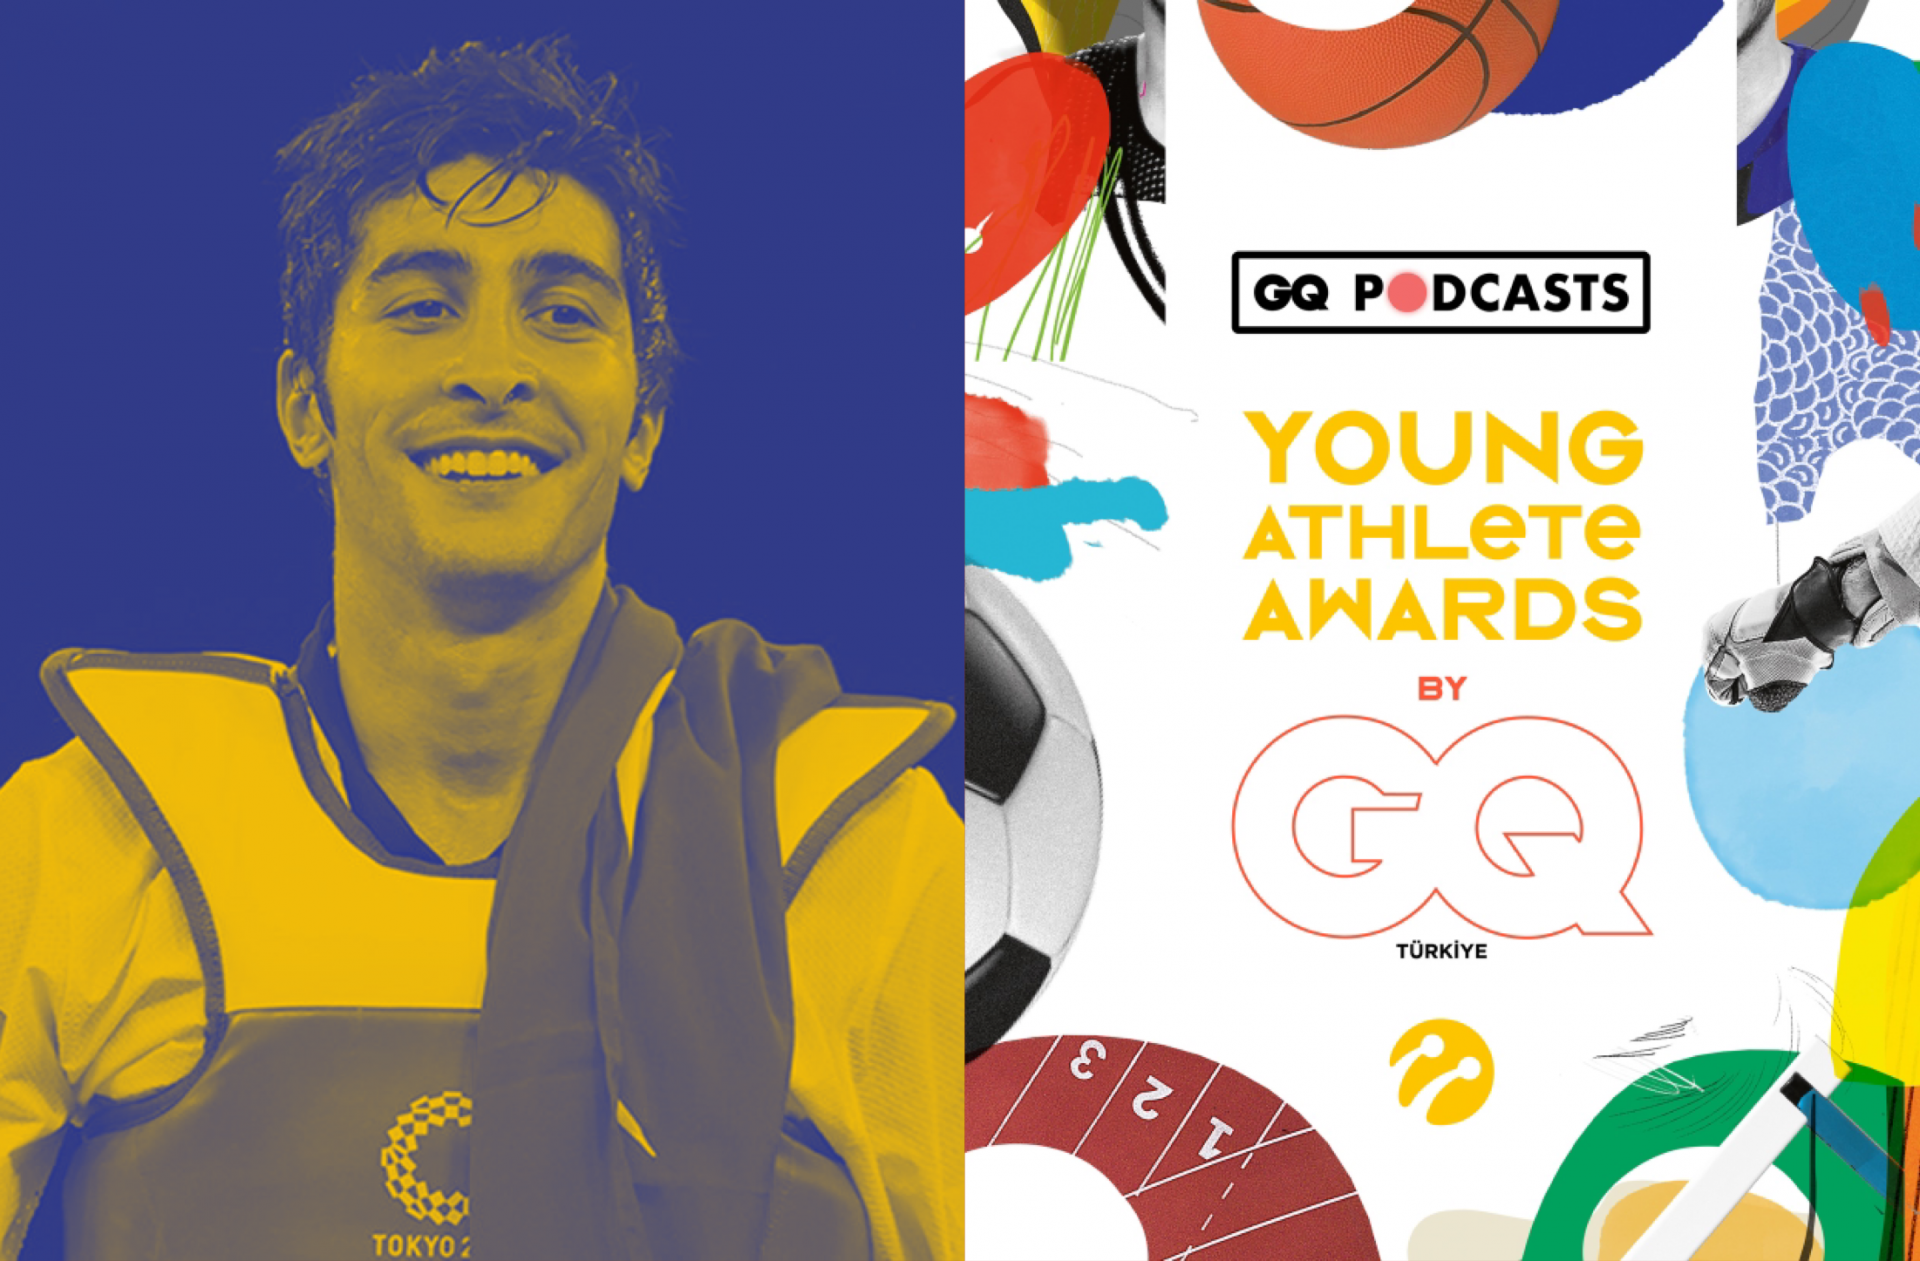 Hakan Reçber: | GQ Podcasts: Young Athlete Awards